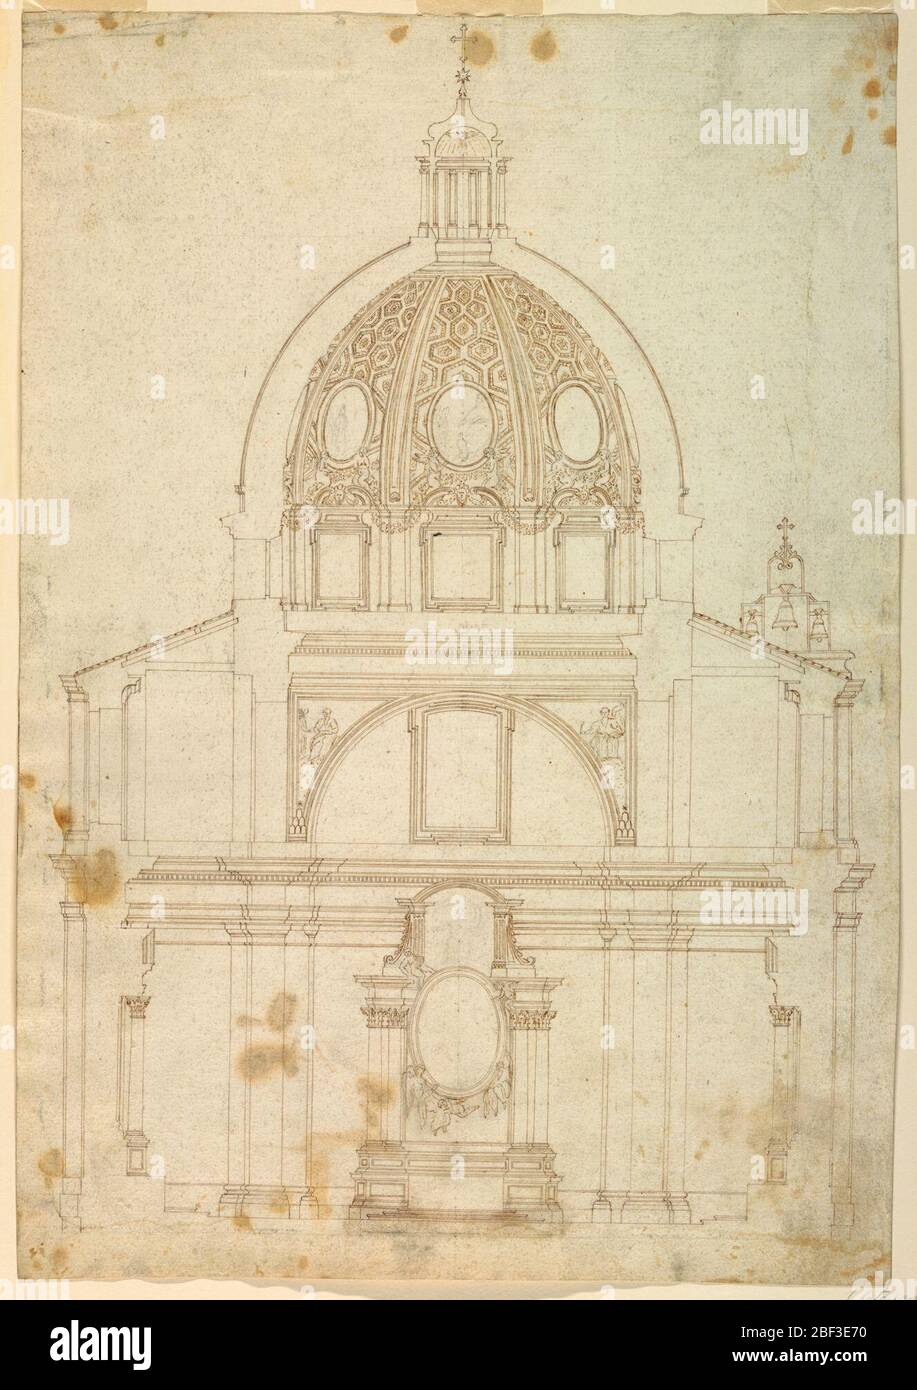 Cross section of church of S Tommaso da Villanova. Cross section of a church with a cupola, S. Tommaso da Villanova at Castelgandolfo. The altar with the frame of an oval painting supported by angels. Above the entablature the star and mountains, charges of the coat of arms of Pope Alexander VII. Stock Photo